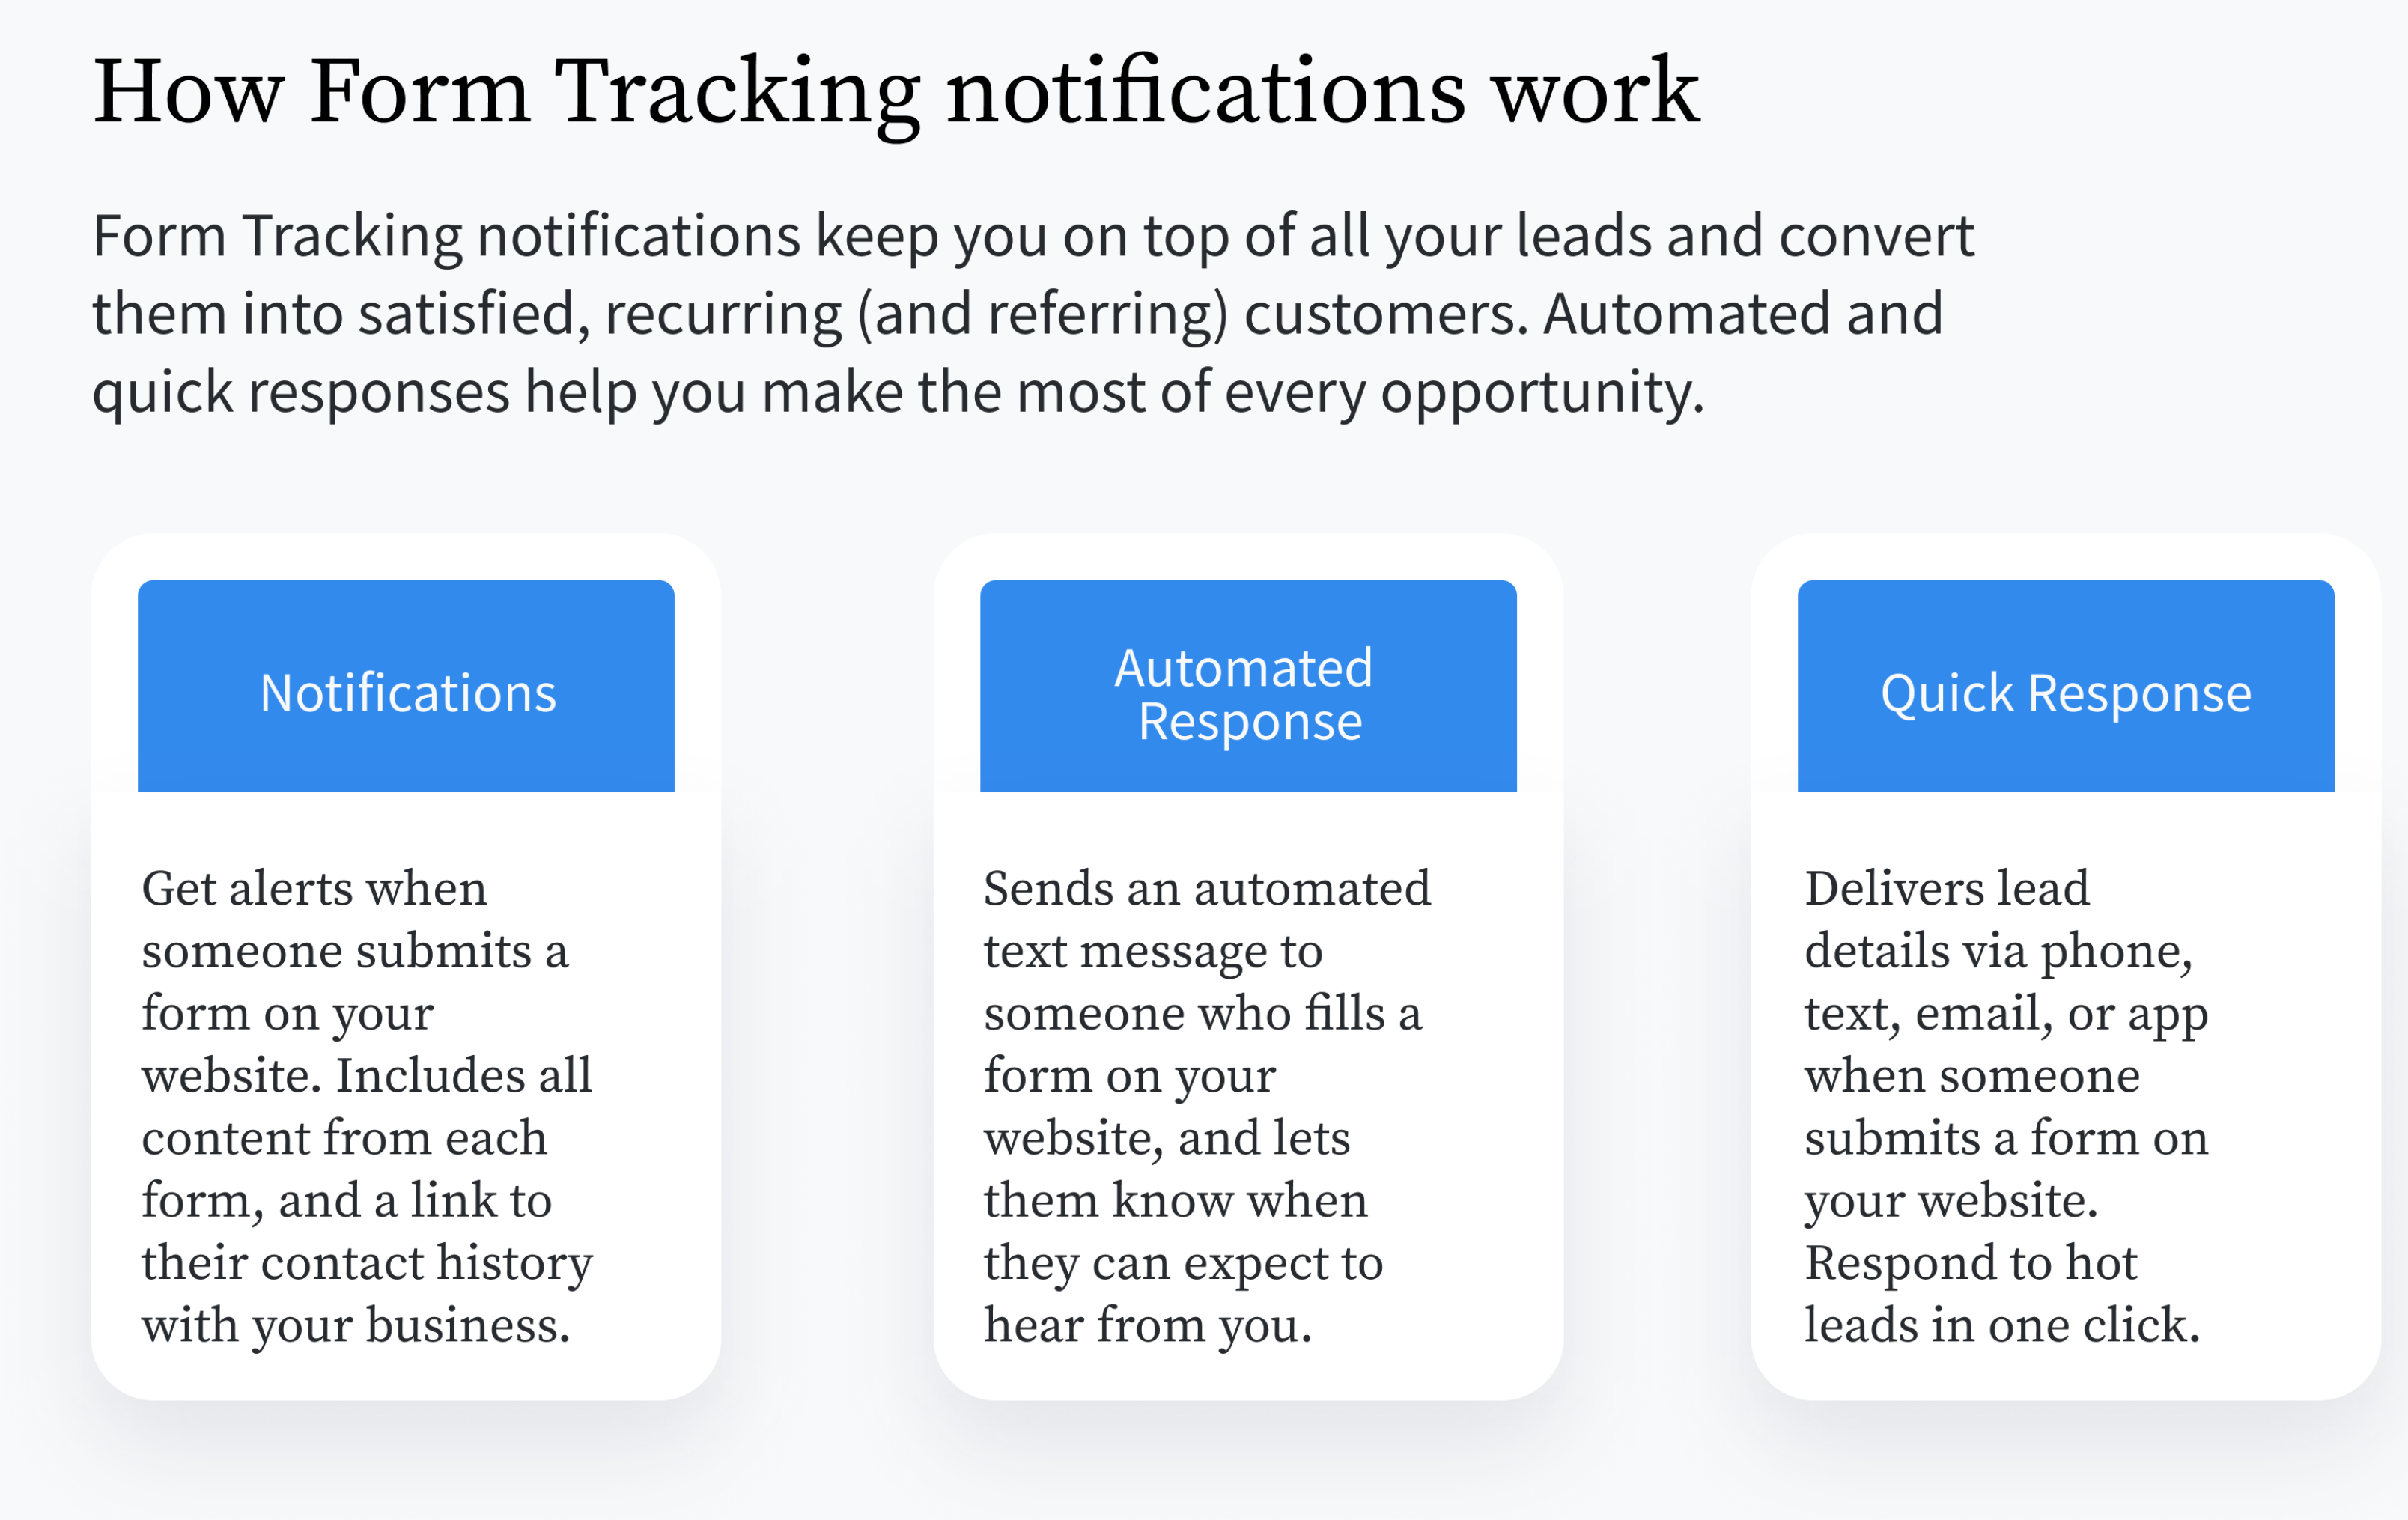 How form tracking notifications work